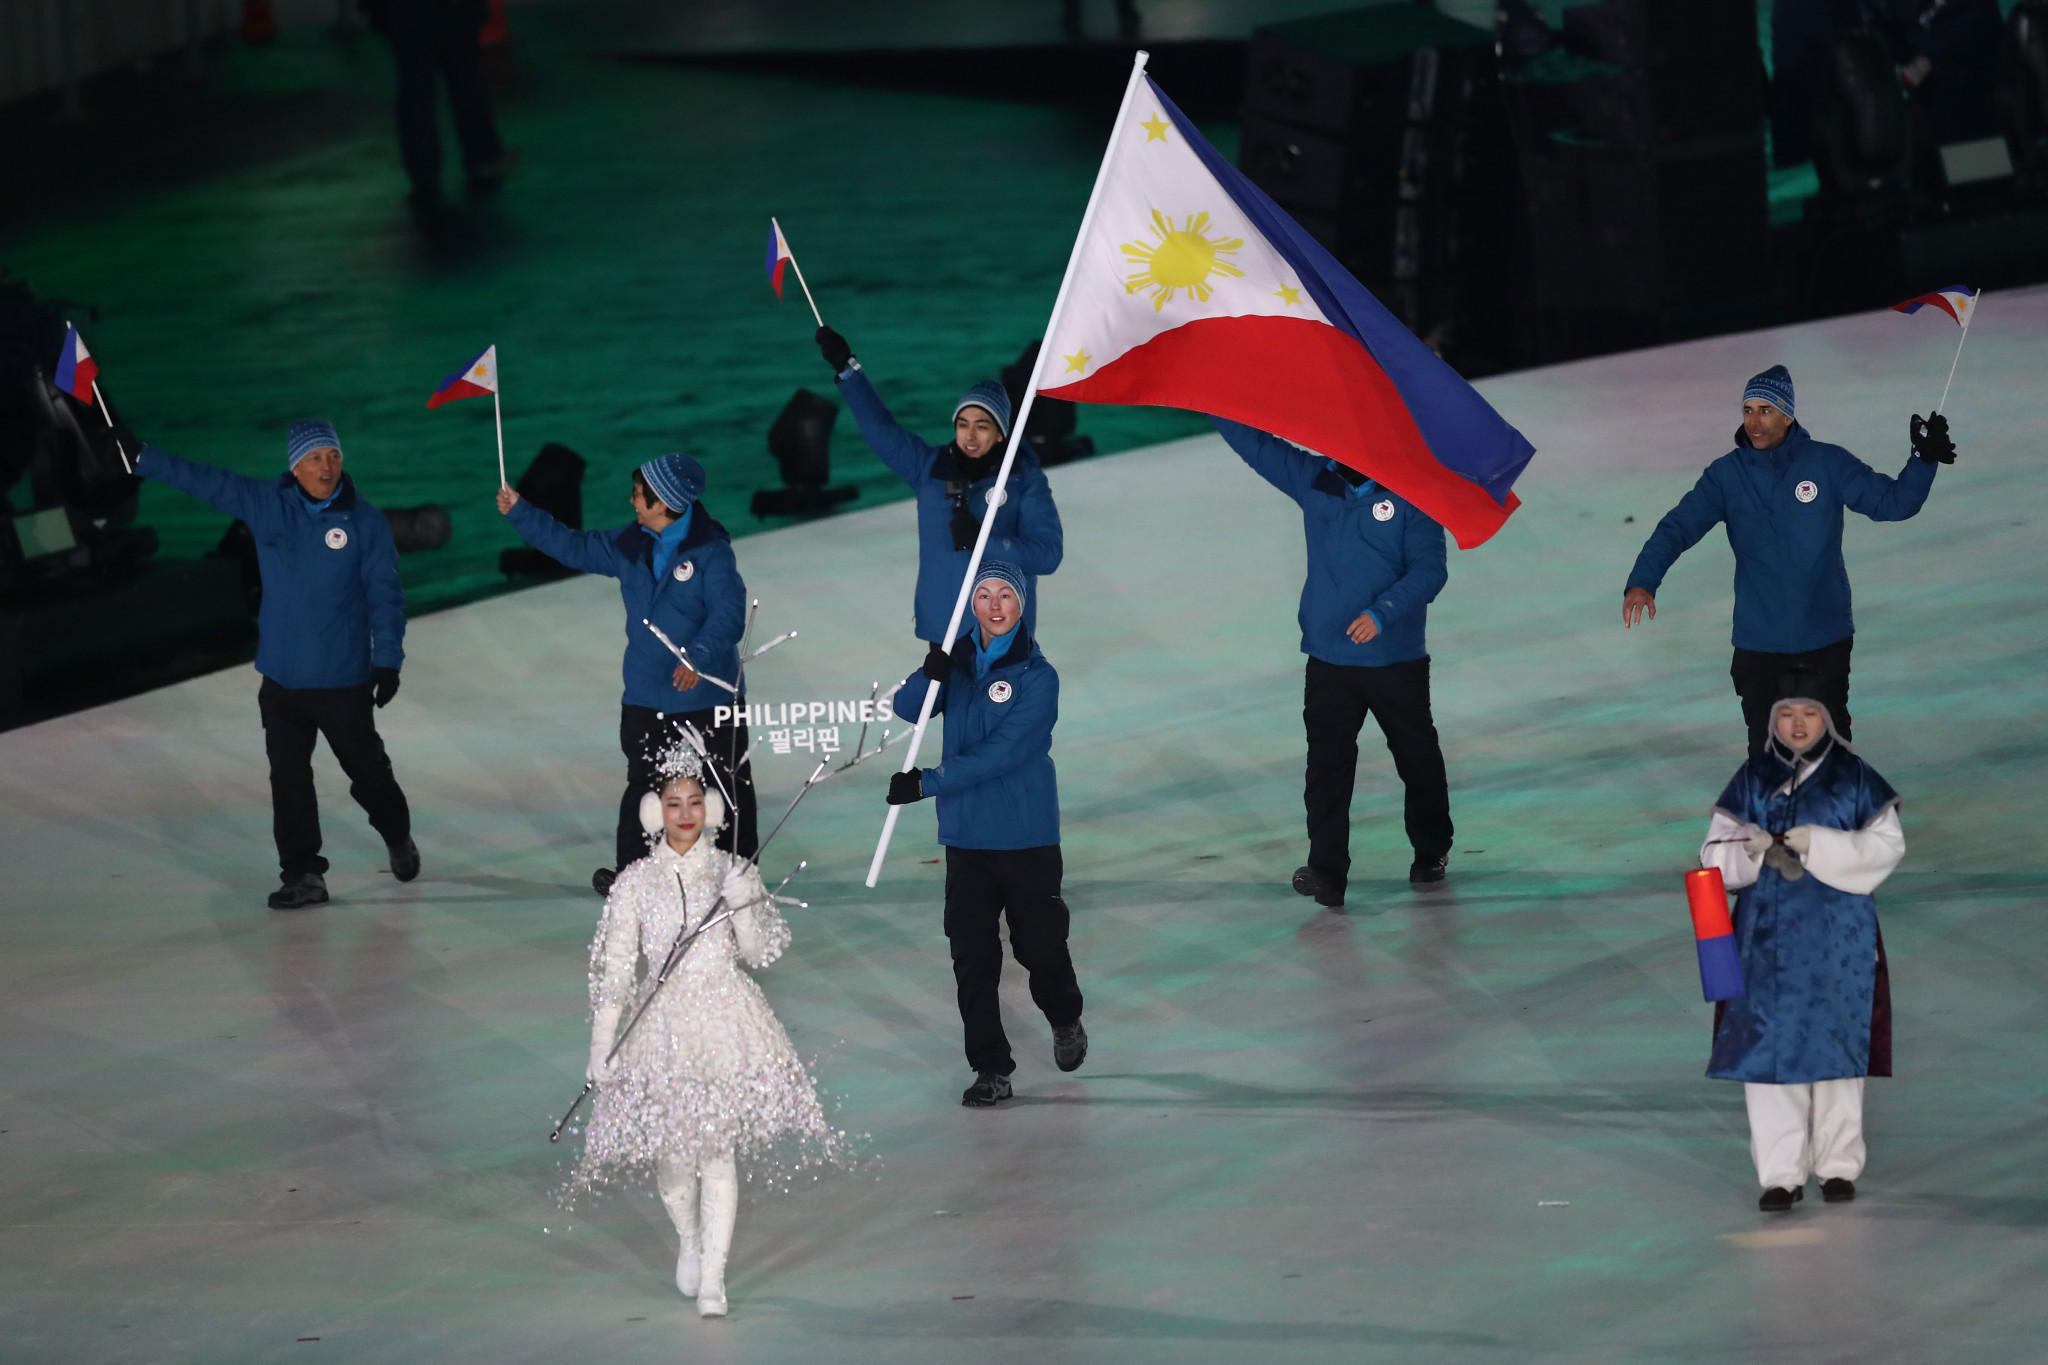 The Philippine Olympic Committee hosted the event in Pasig City ©Getty Images